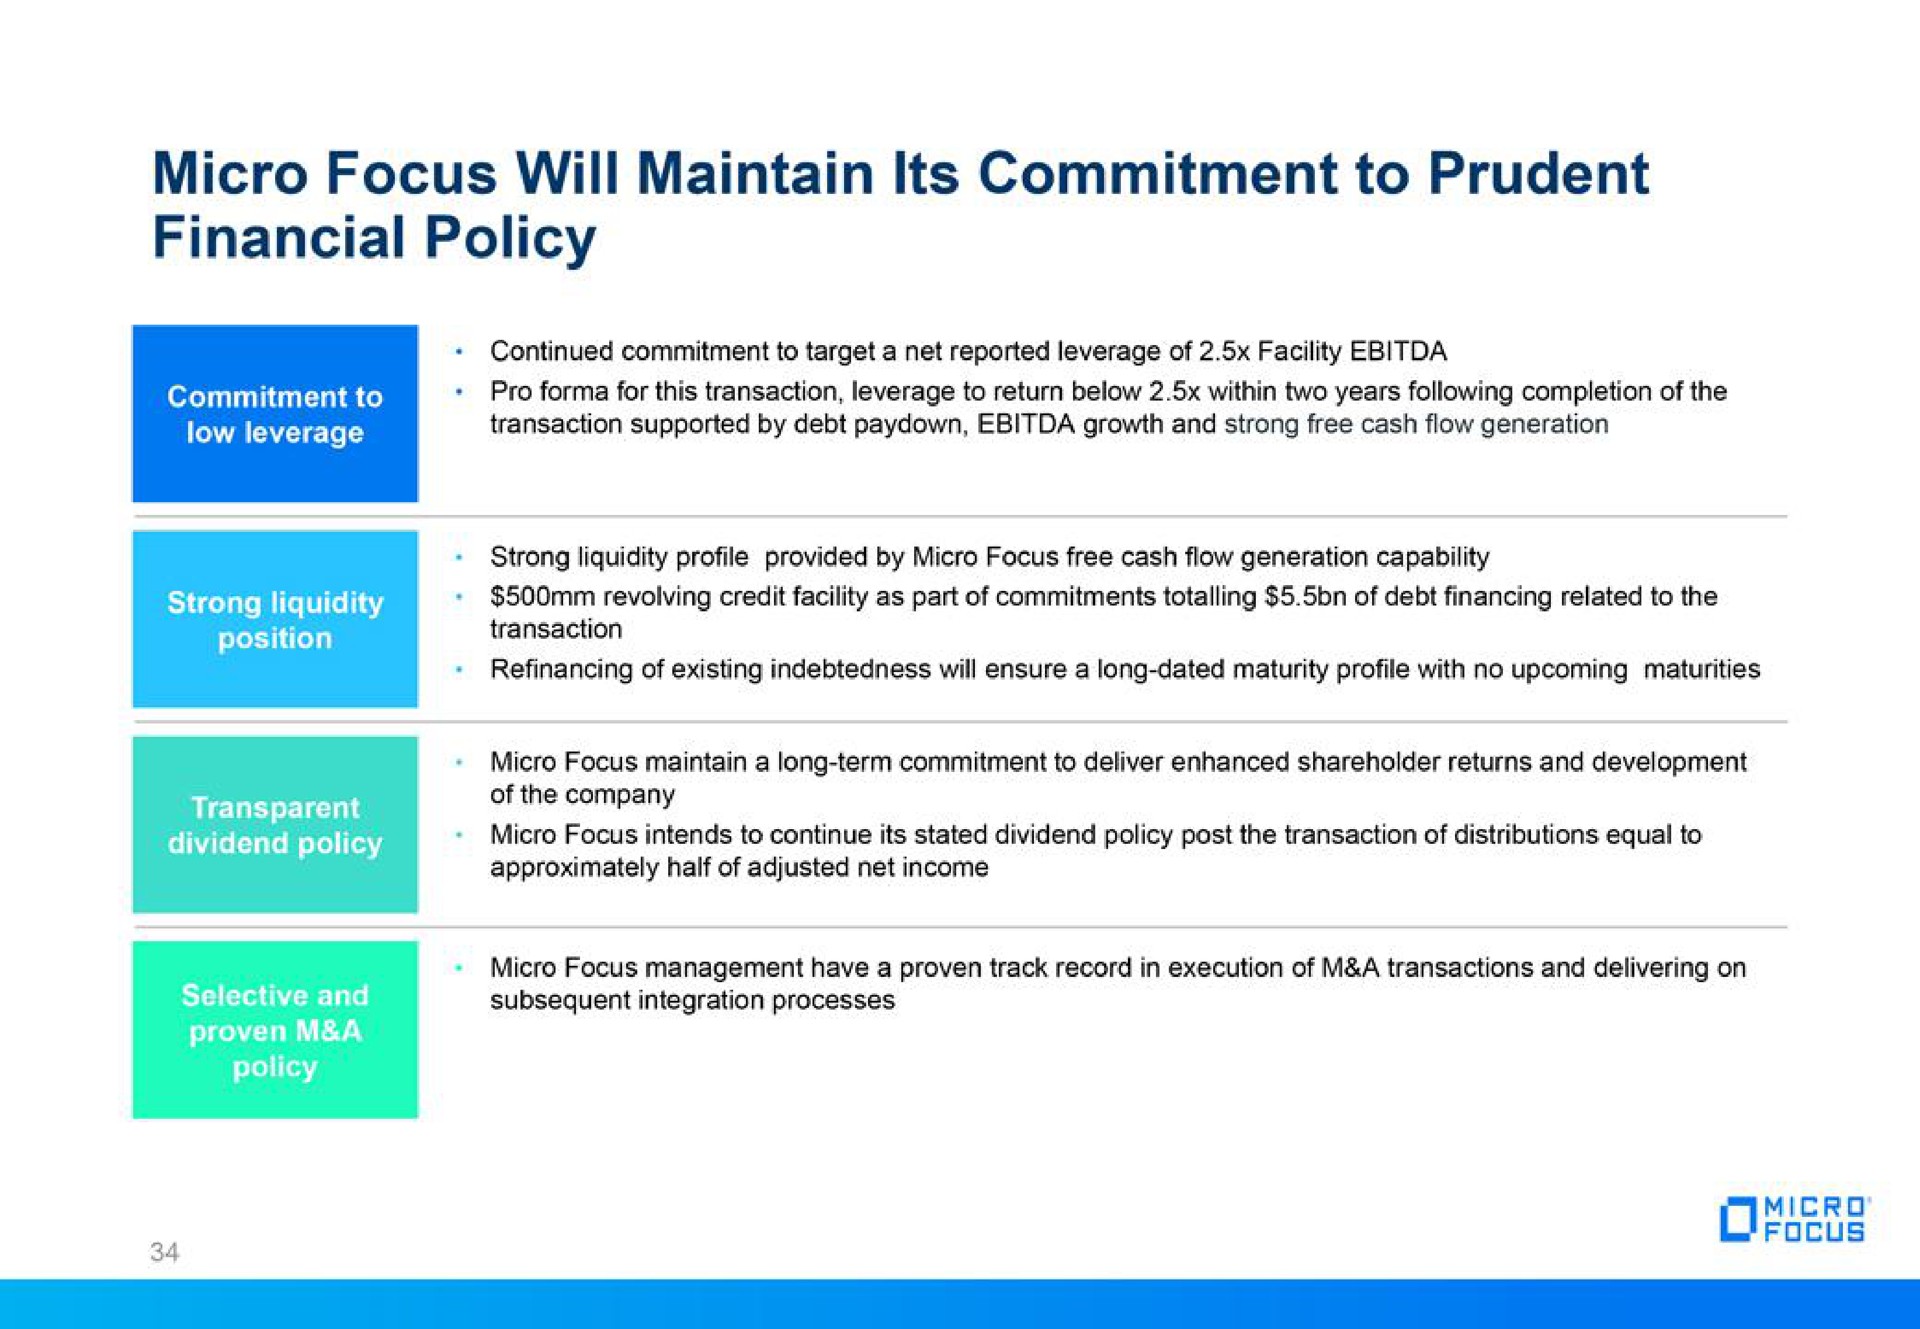 micro focus will maintain its commitment to prudent financial policy | Micro Focus